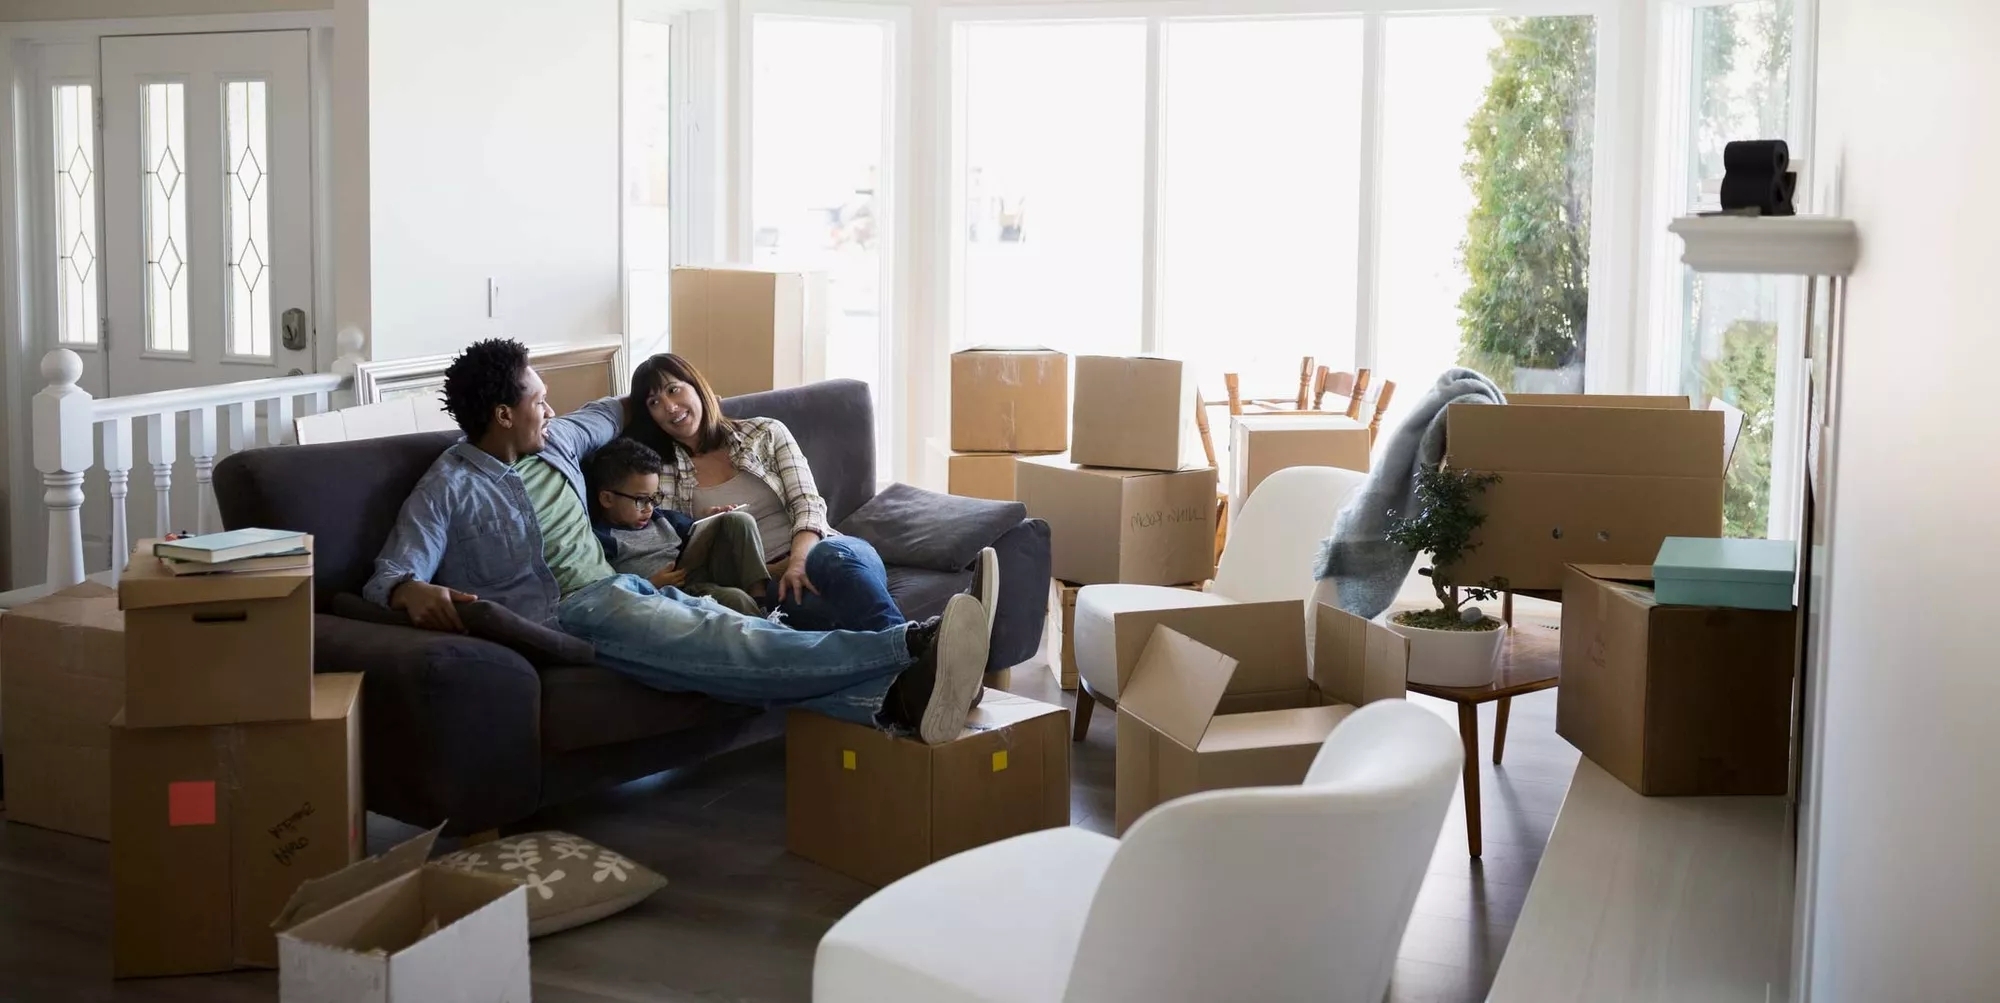 A smiling family resting on a couch, in a living room crowded with moving boxes. They appear to be moving in.